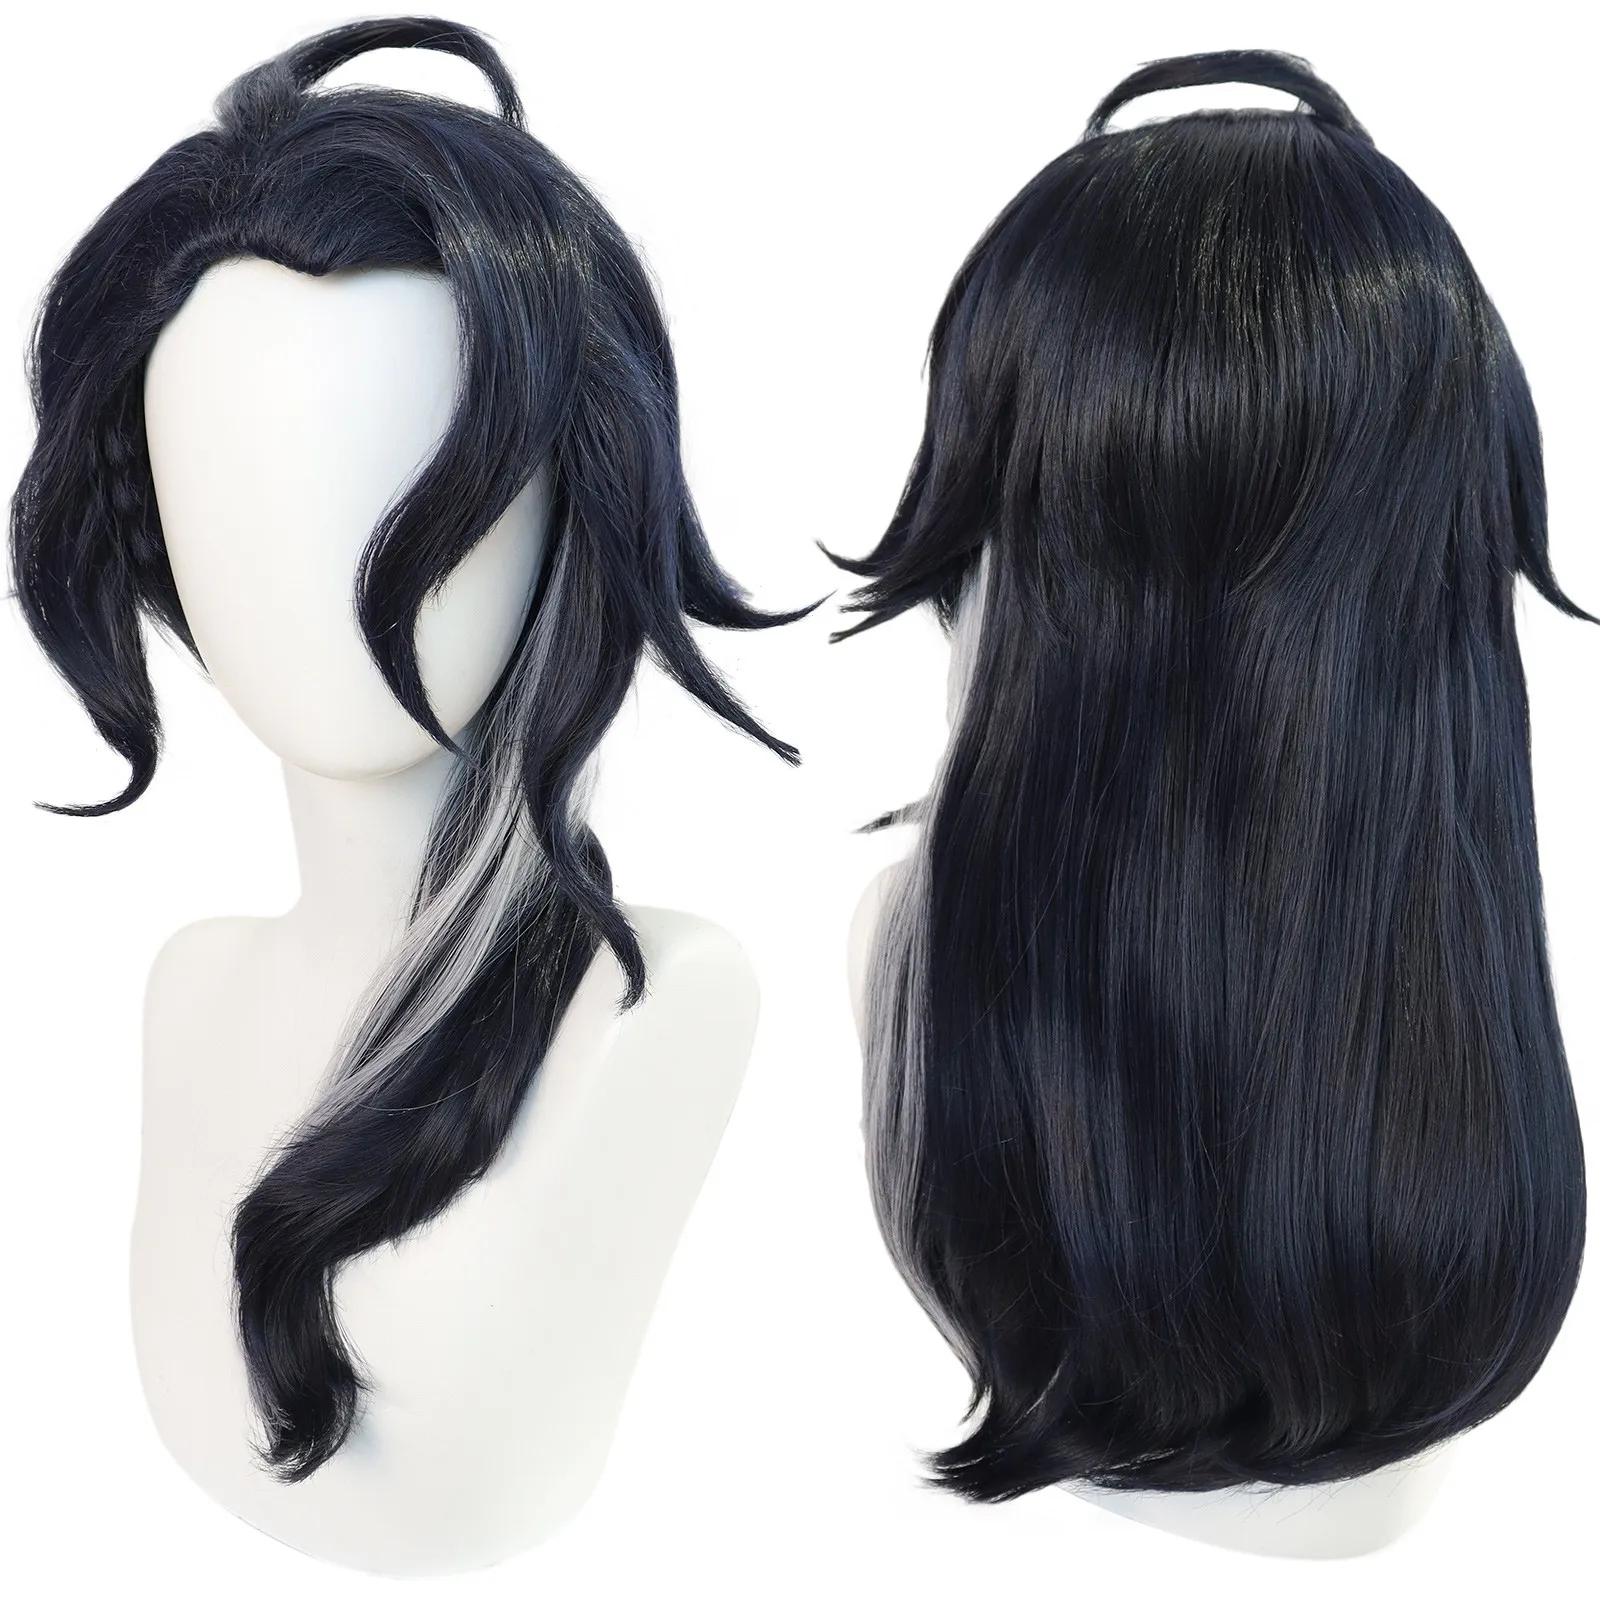 Anogol Synthetic Regrator Pantalone Cosplay Wig Game Genshin Impact 52CM Dark Blue Mix White Wavy Hair for Halloween Party